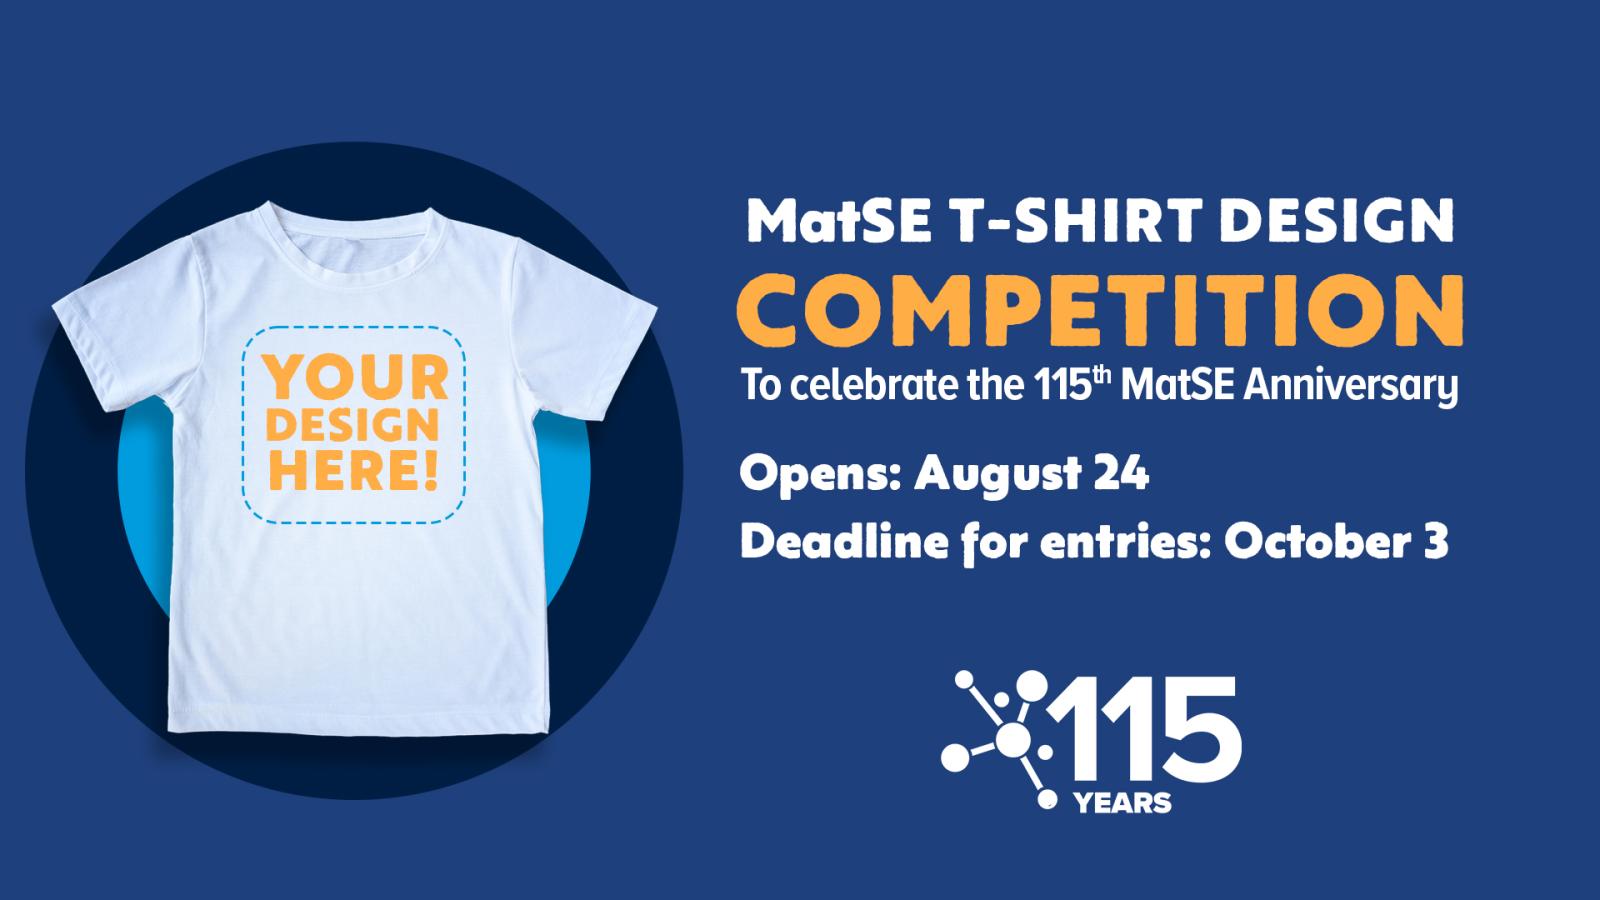 T-shirt competition to celebrate the 115th MatSE Anniversary